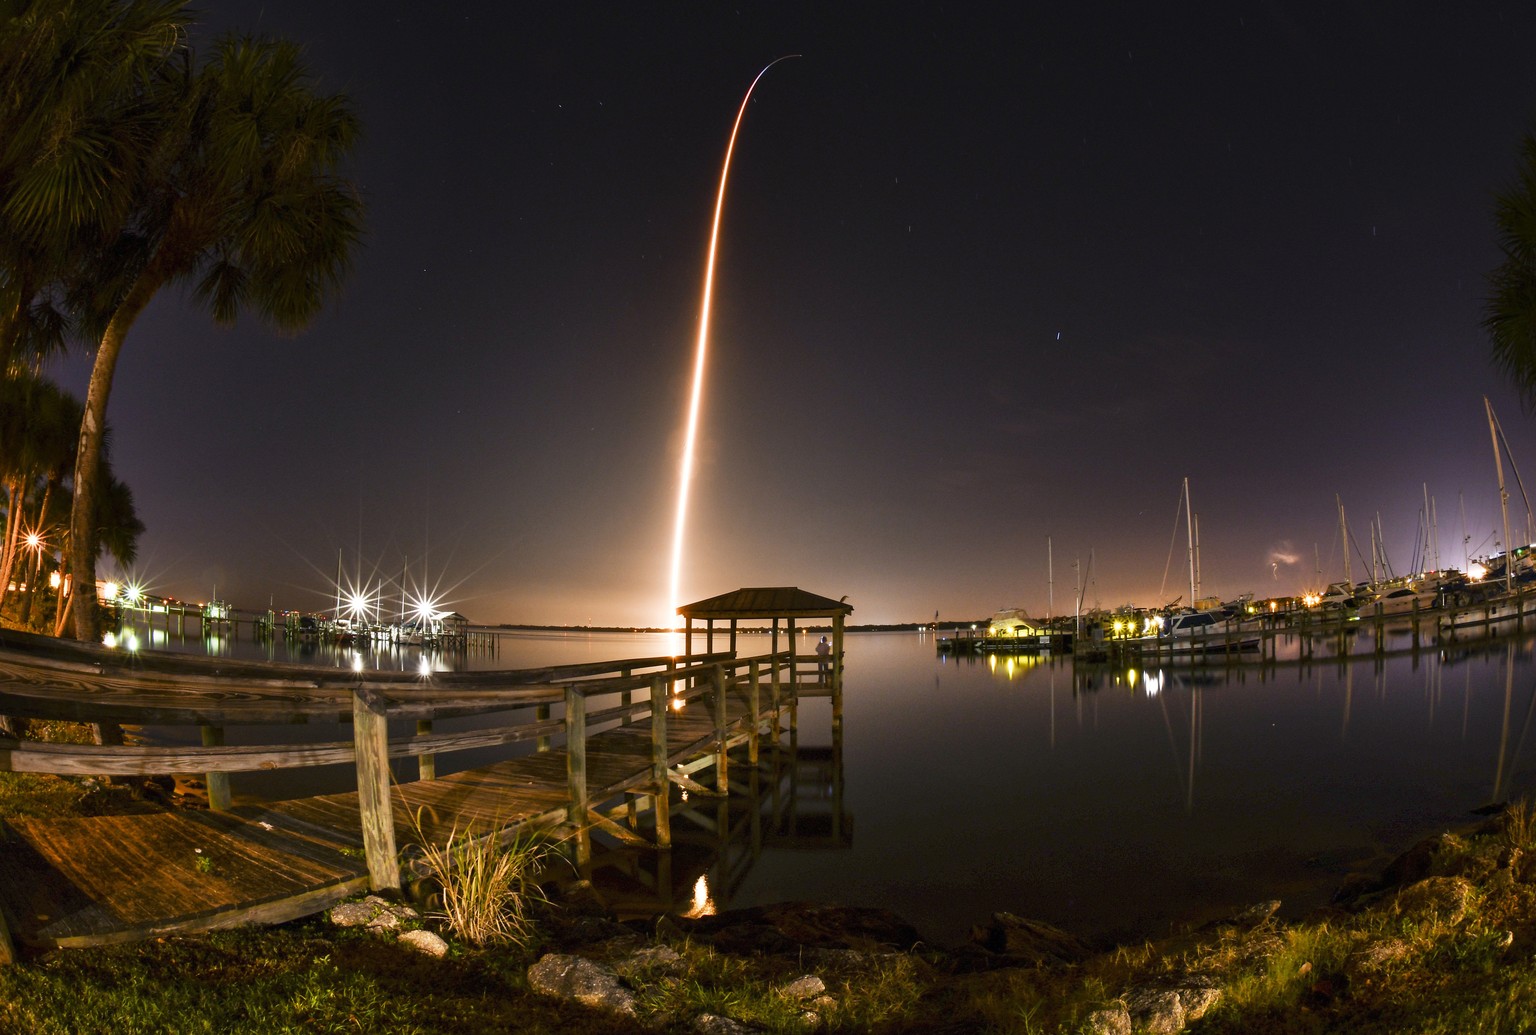 The launch of the SpaceX Crew Dragon capsule atop a Falcon 9 rocket to the International Space Station from Pad 39A at Kennedy Space Center Saturday morning, March 2, 2019, in Florida. (Malcolm Denema ...